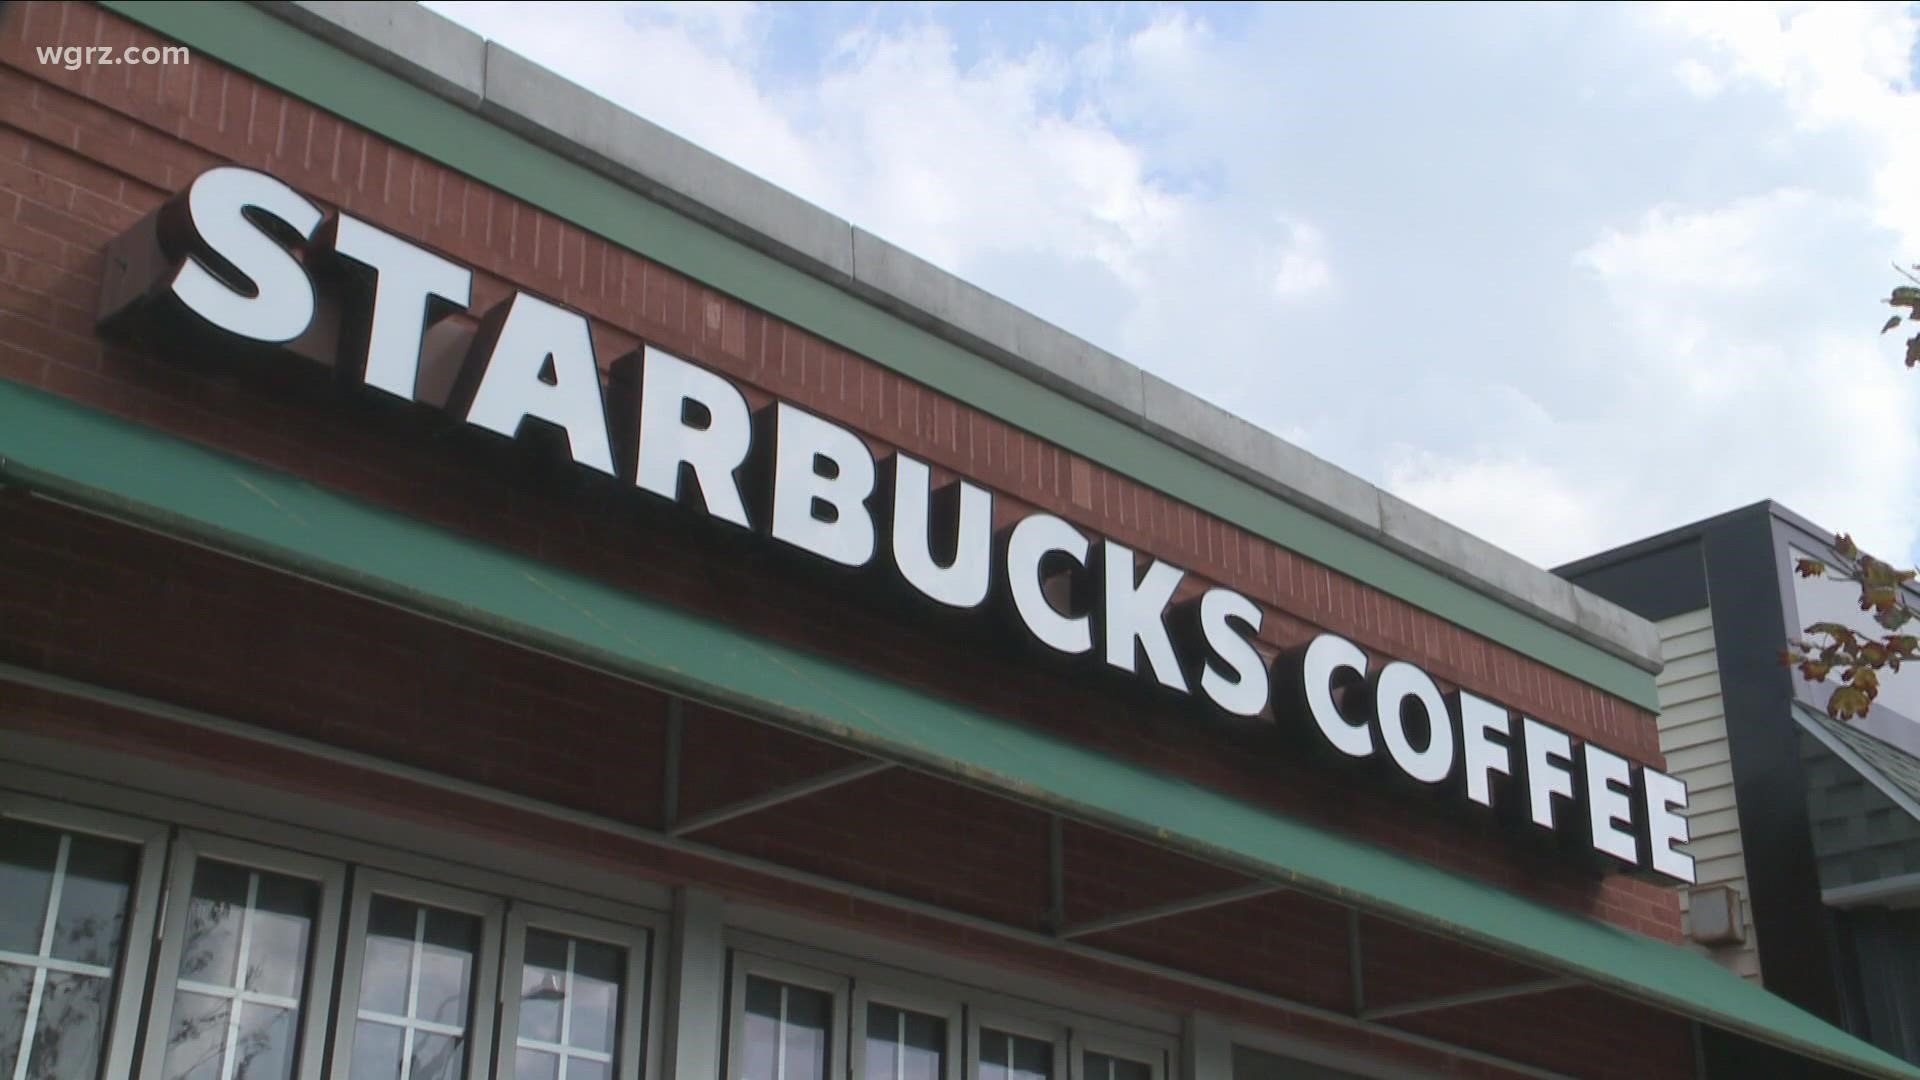 Ballots were mailed out Wednesday to Starbucks partners at three Buffalo locations asking for a vote of yes or no to unionize stores.